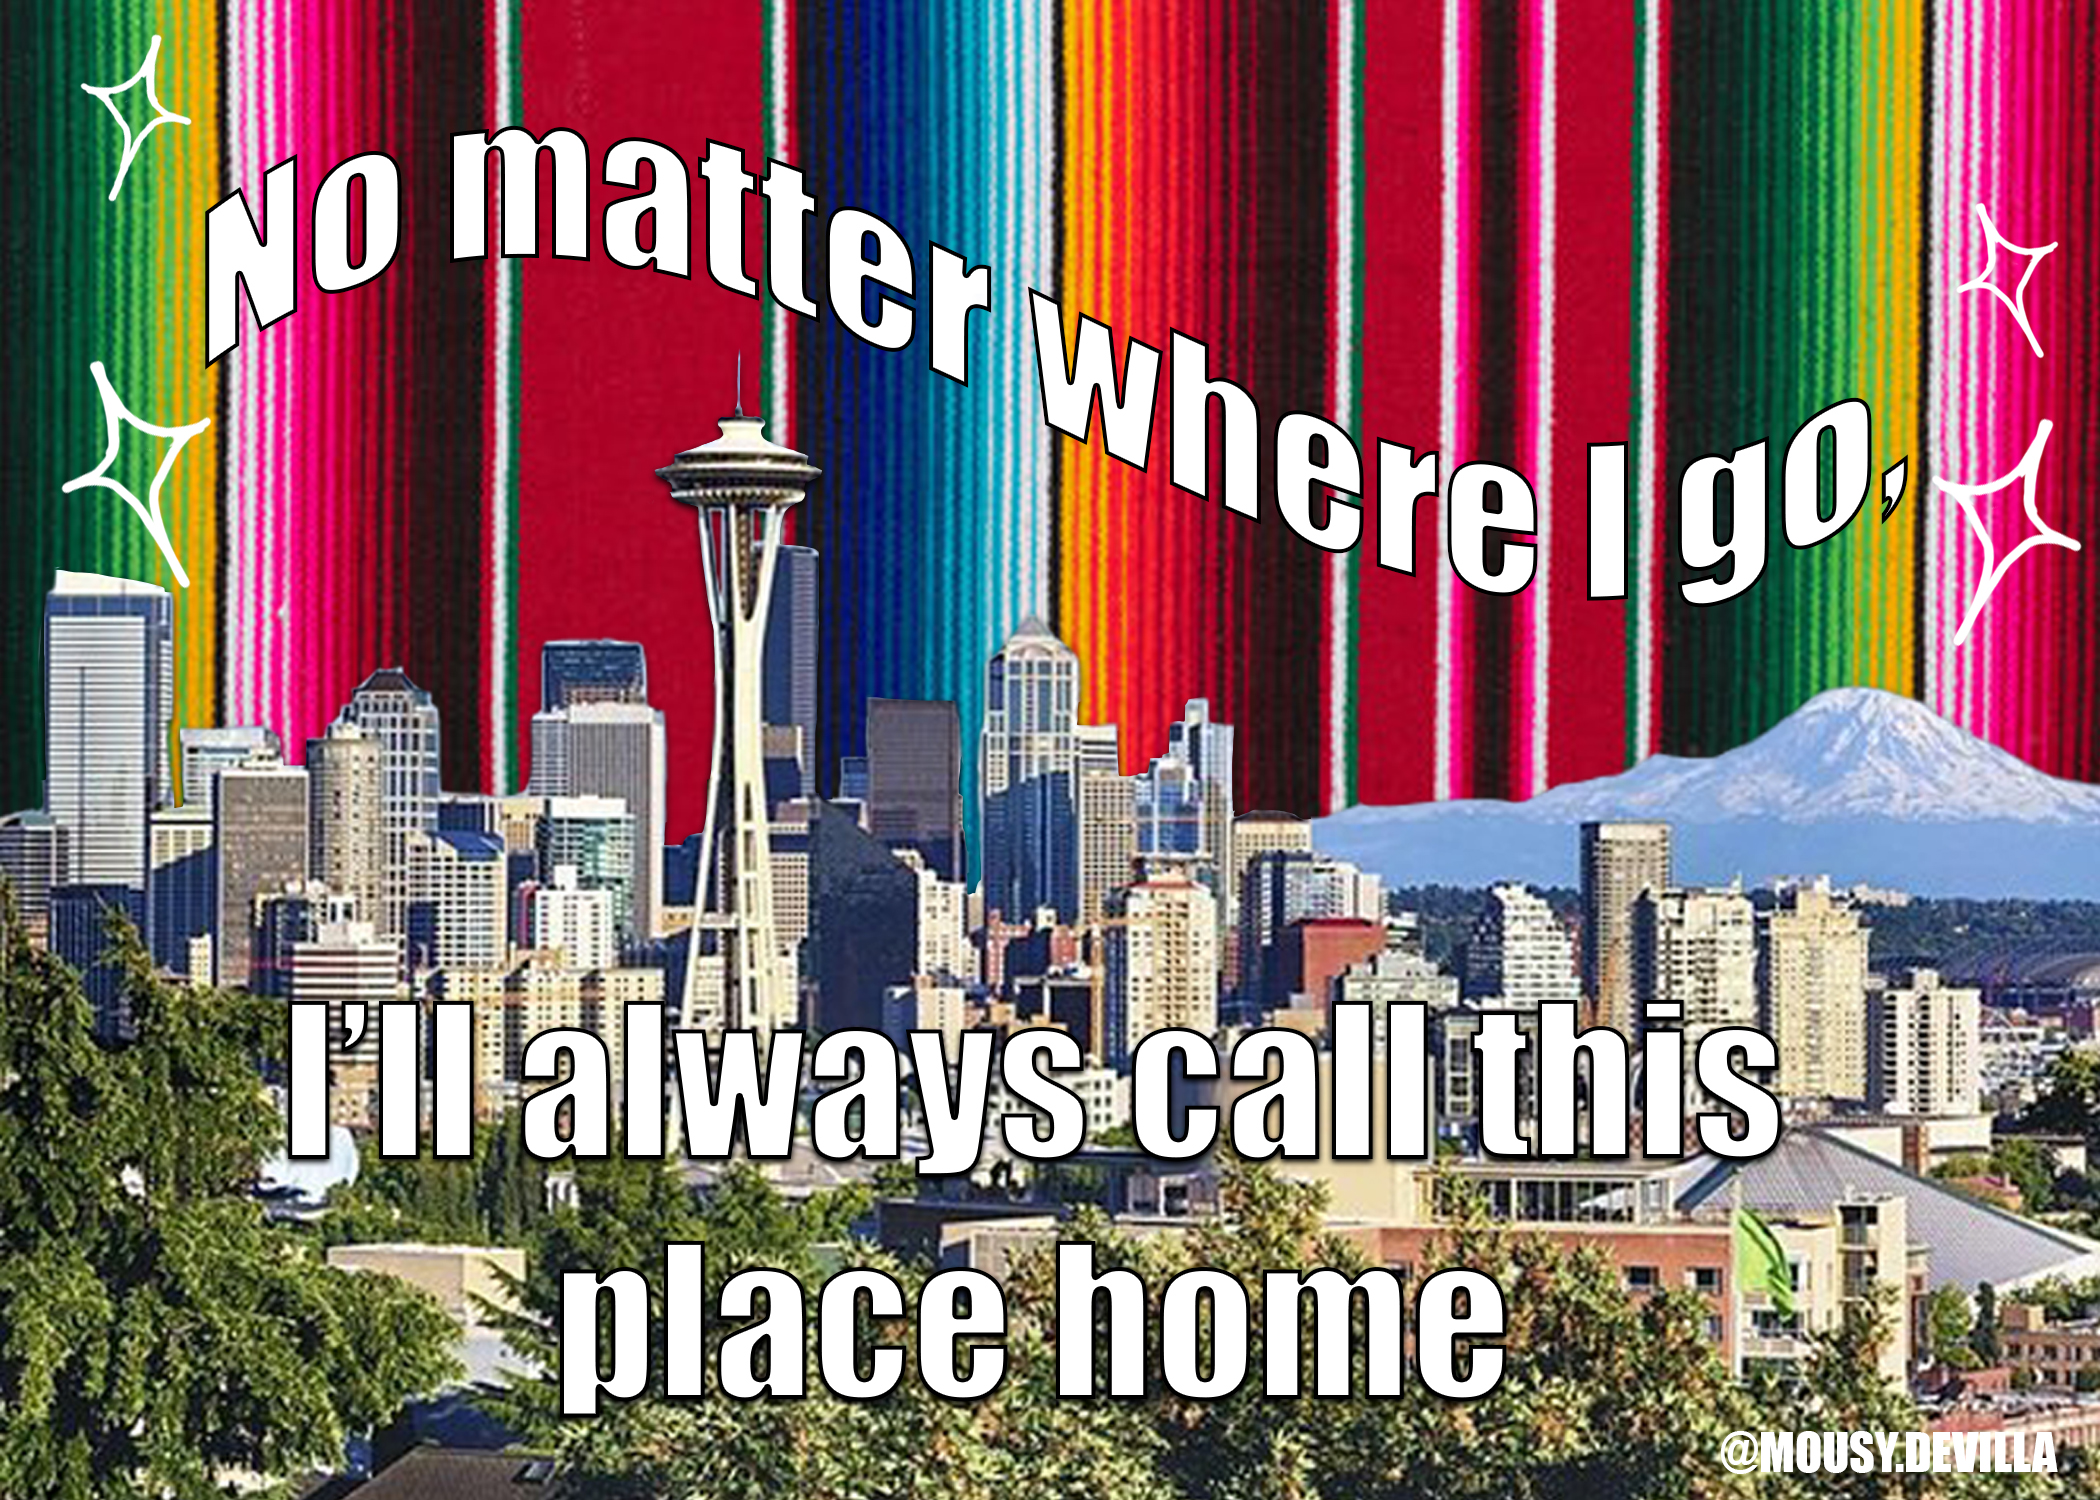 collage art featuring the City of Seattle skyline set against a backdrop of a colorful traditional Mexican blanket. Text reads: "No matter where I go, I'll always call this place home."